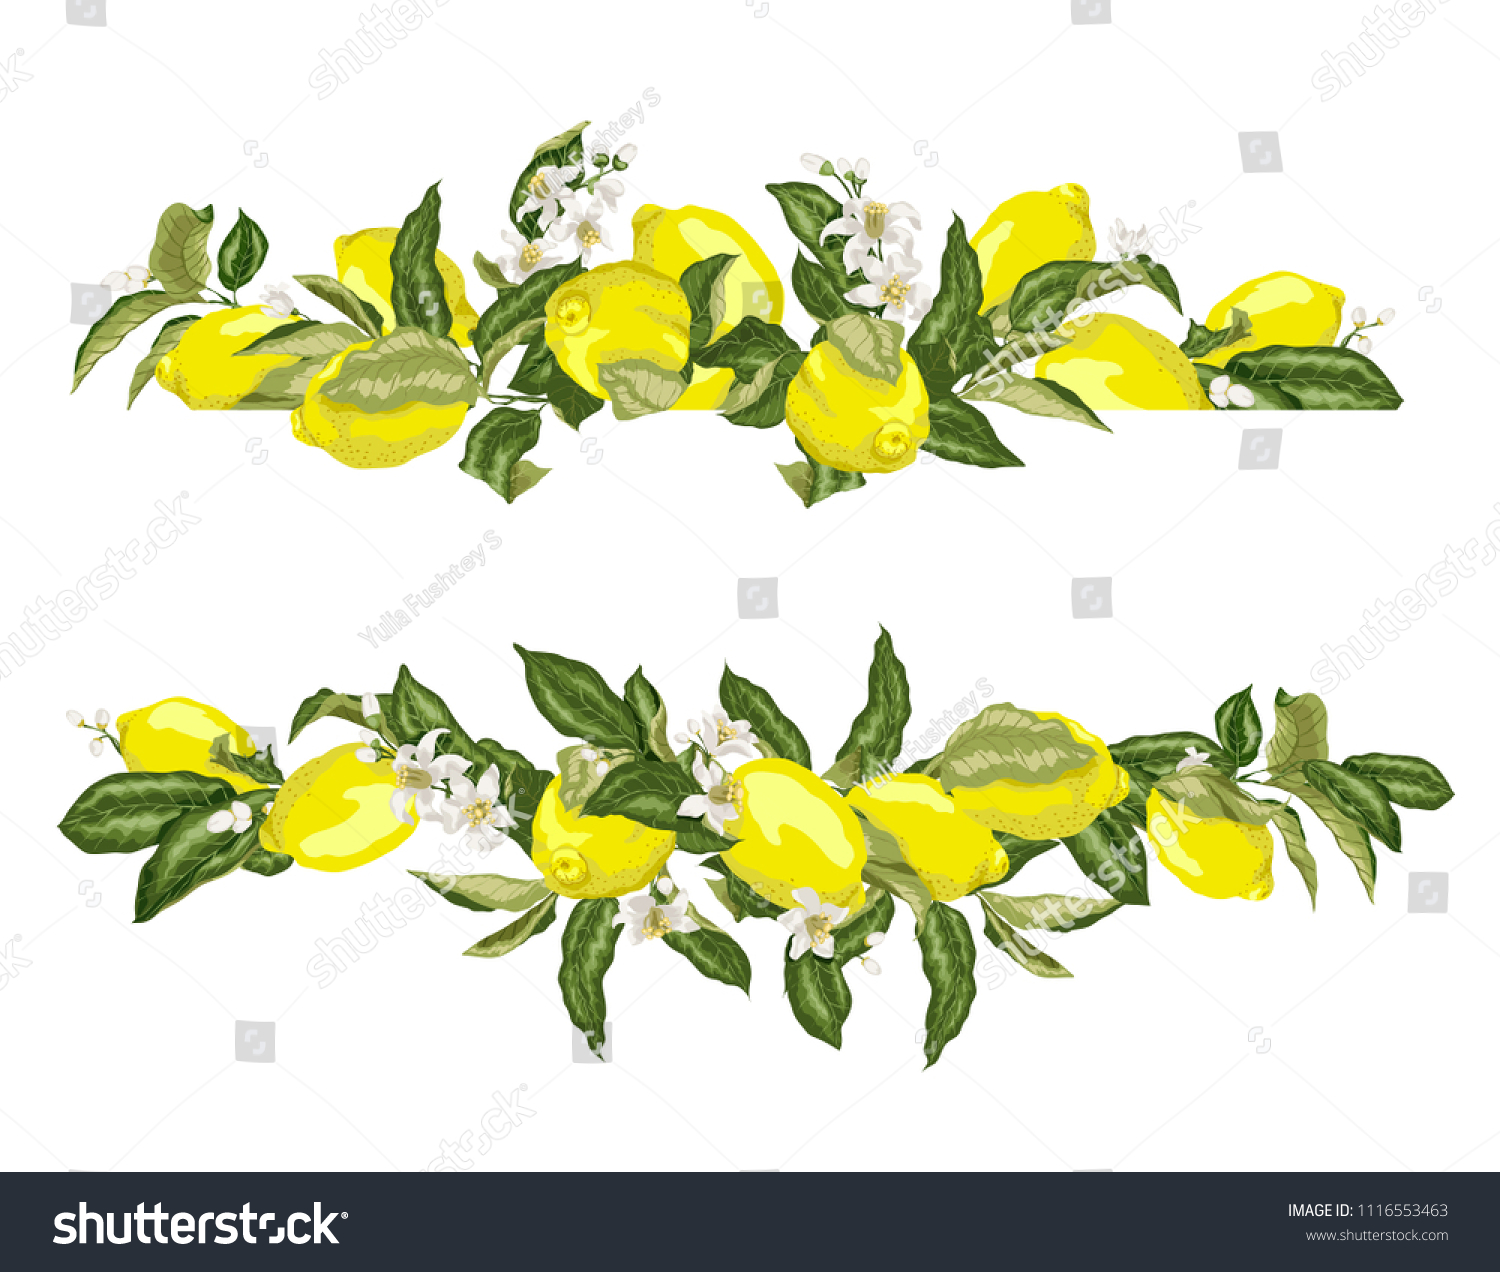 Lime Template Frame Border Wth Citrus Stock Vector (Royalty Free ...